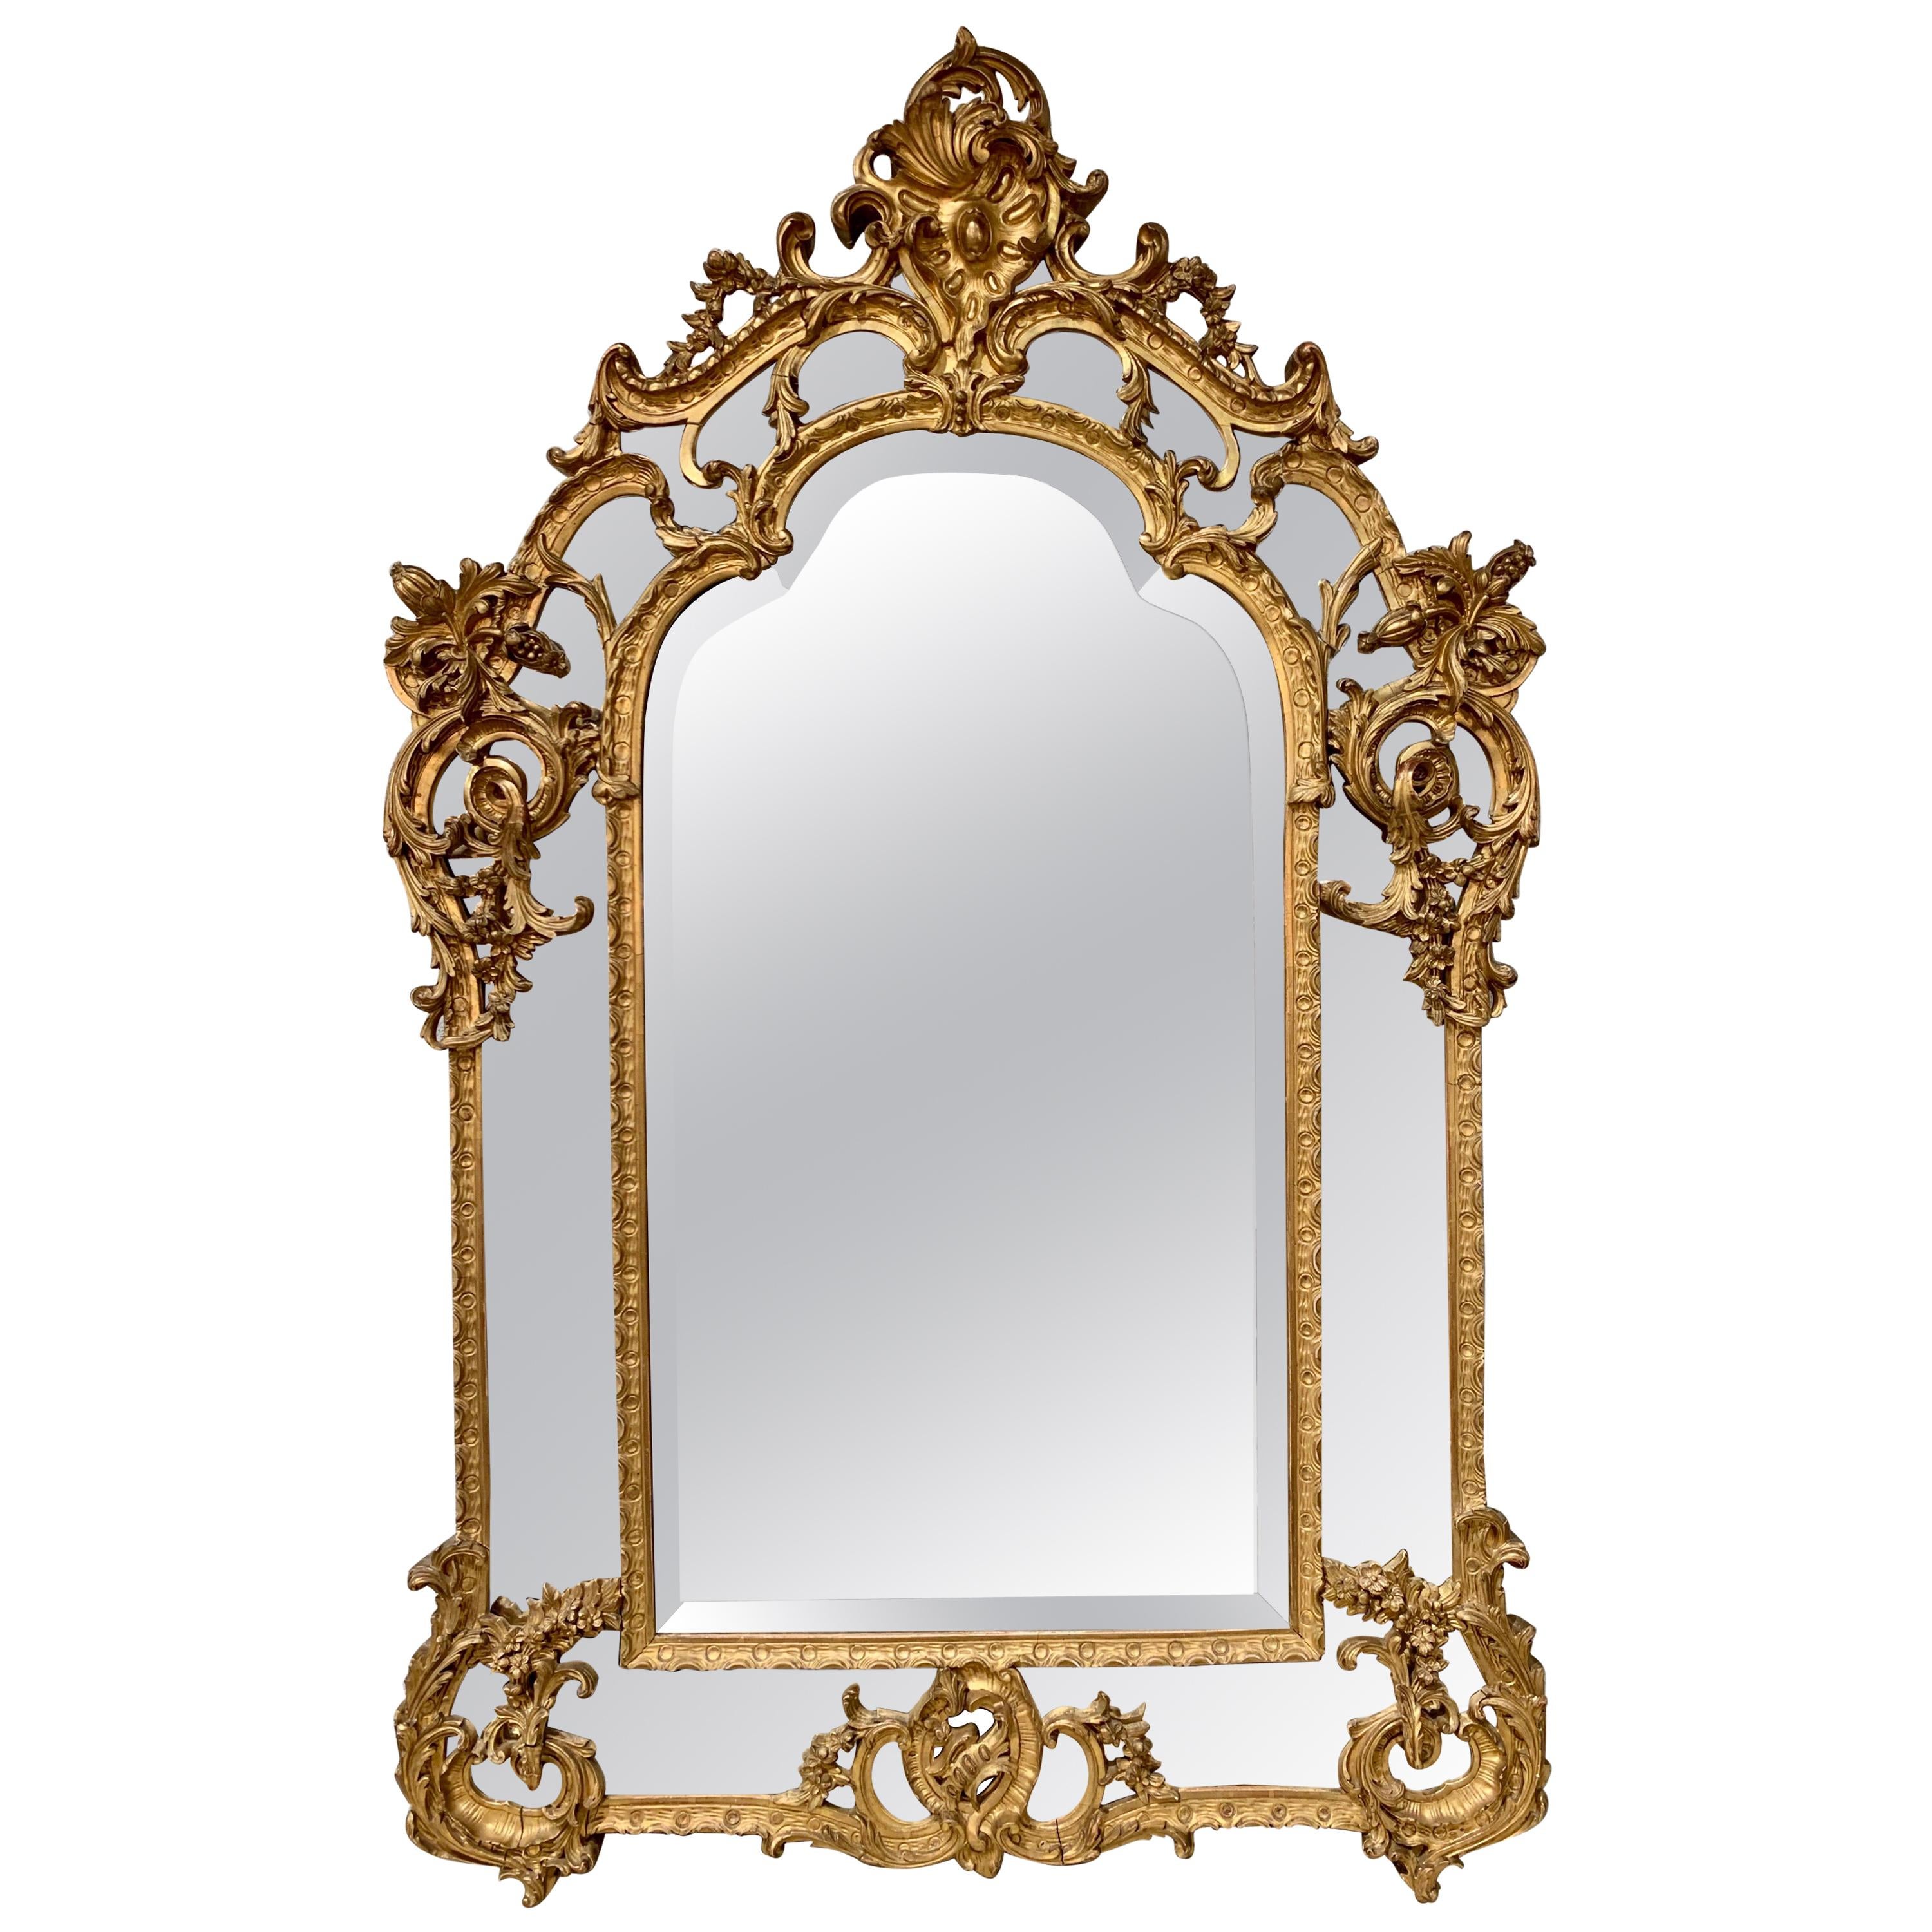 19th Century French Carved Giltwood Rococo Mirror